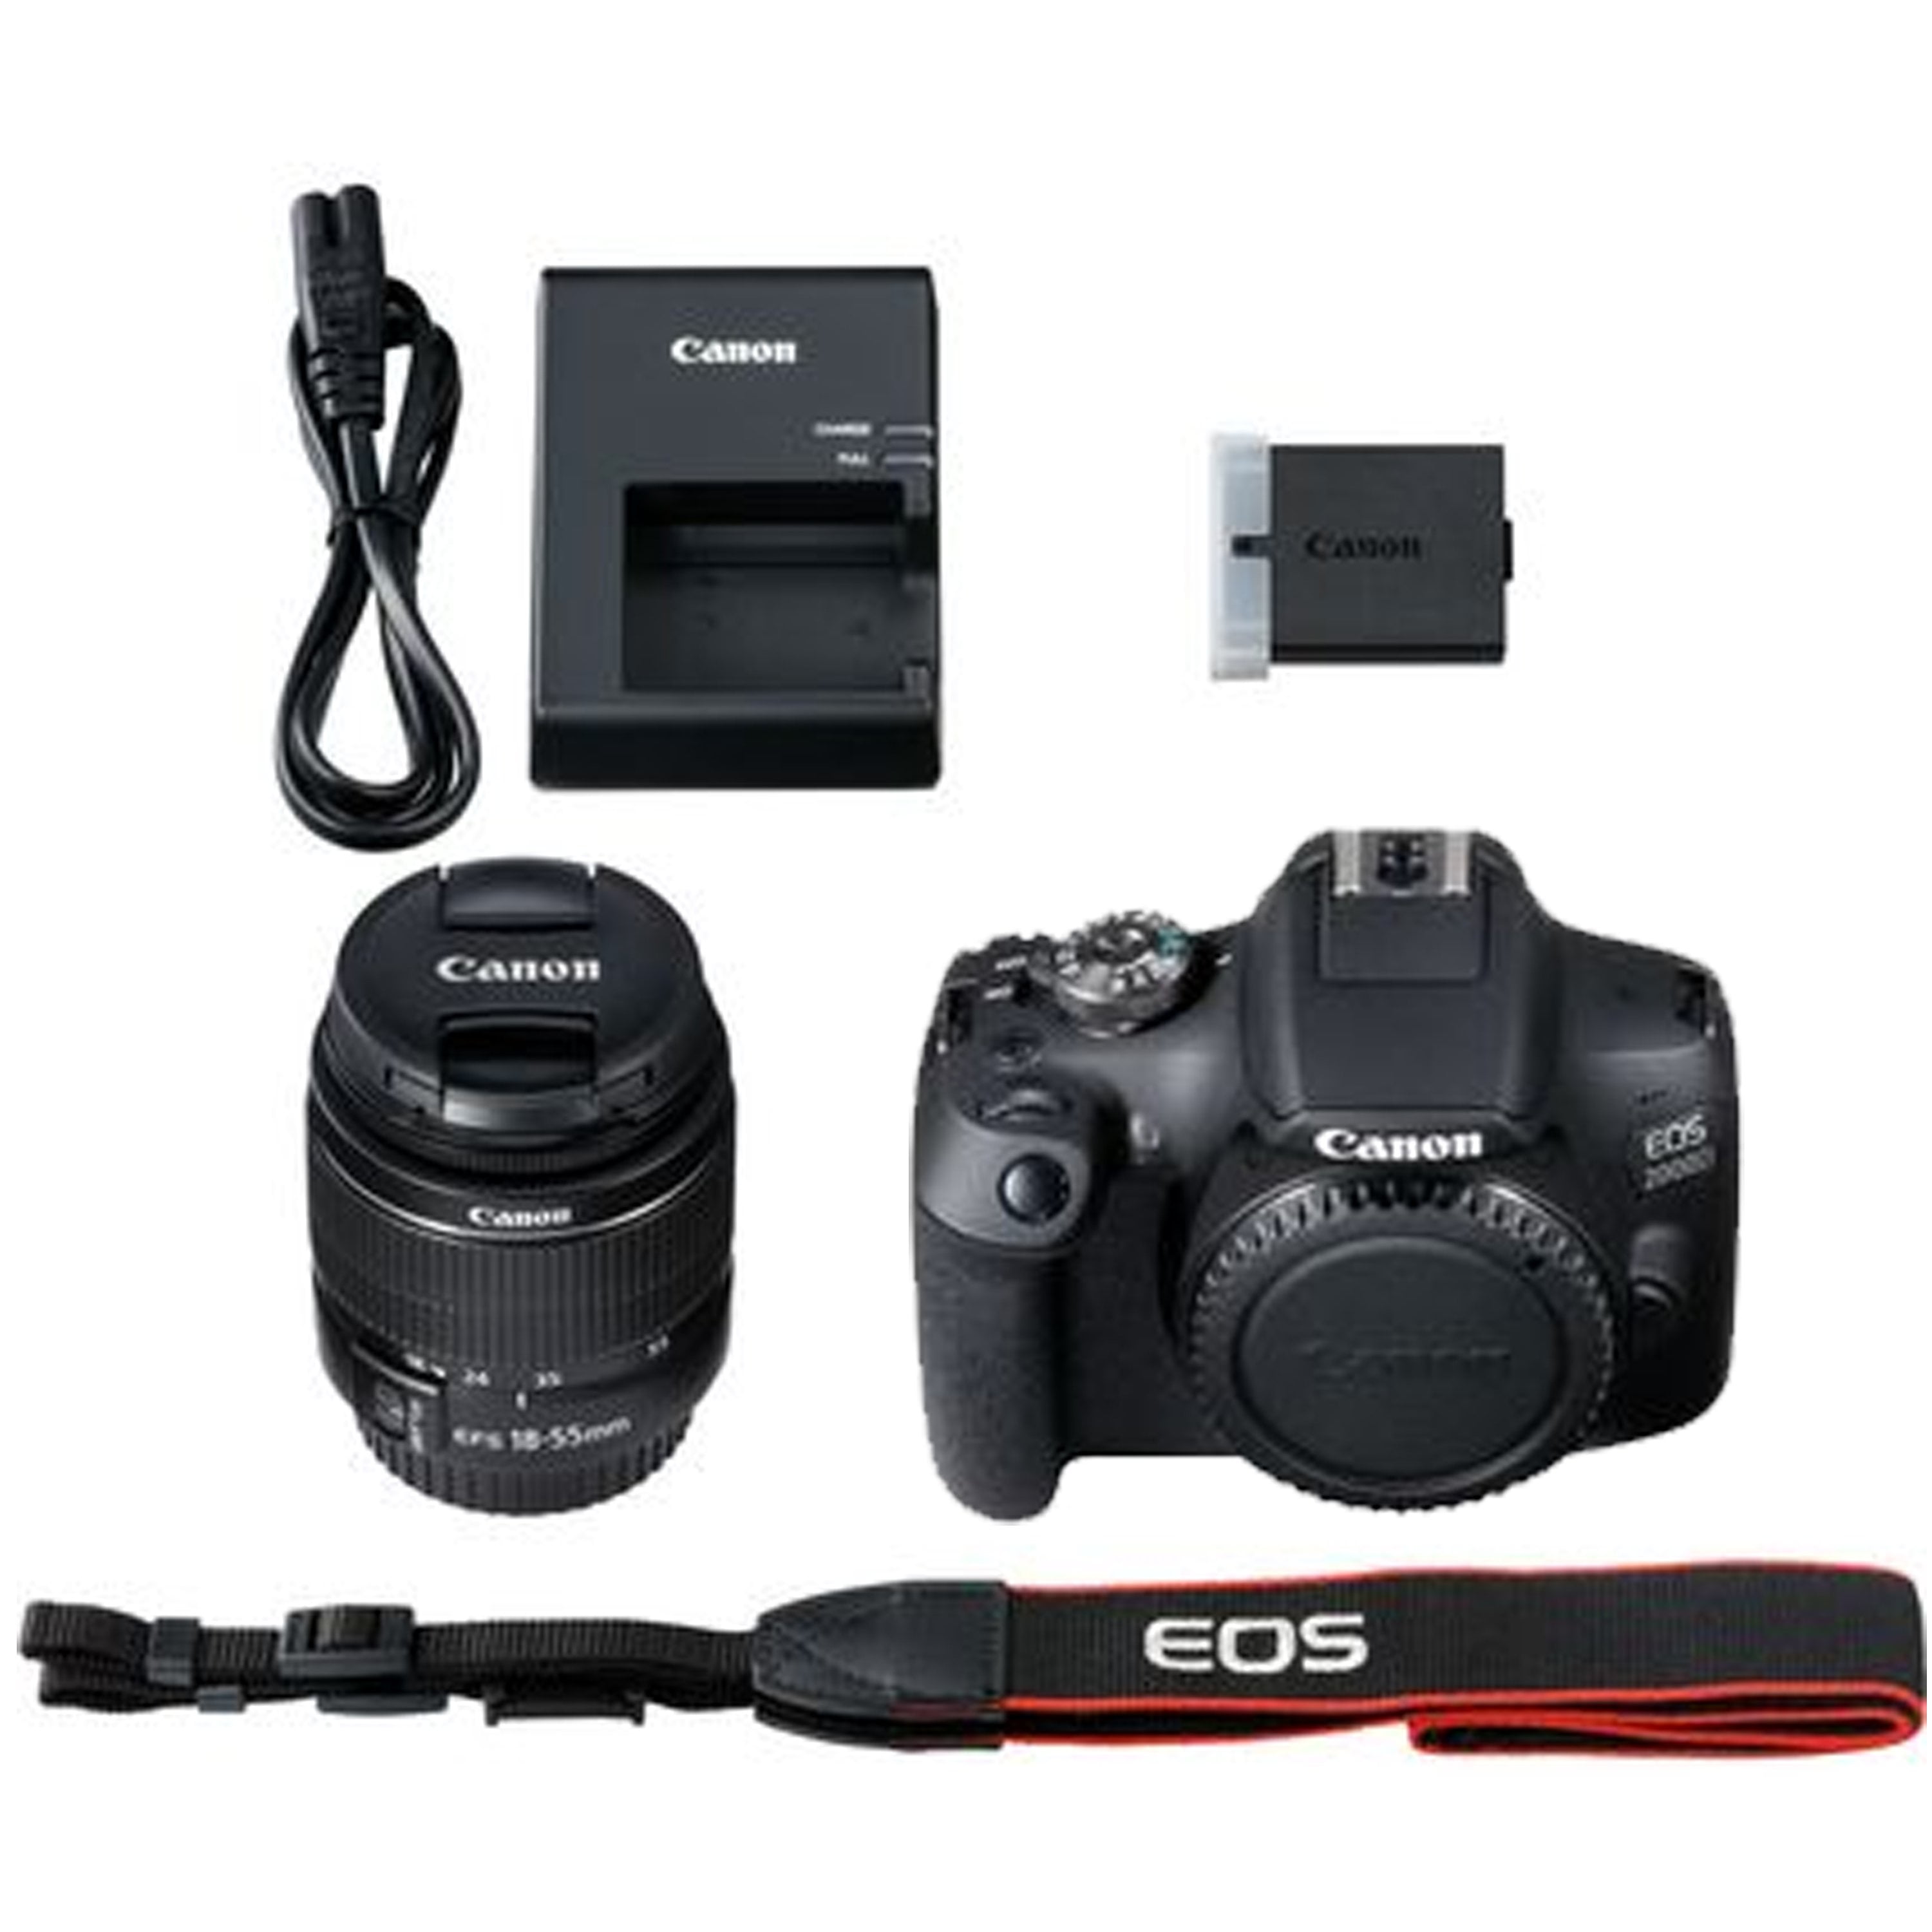 128GB Rebel Canon 20pc f/3.5-5.6 2000D 18-55mm EOS Lens and Tripod, Card, DSLR T7 + Zoom + More with Flash, Camera Bundle